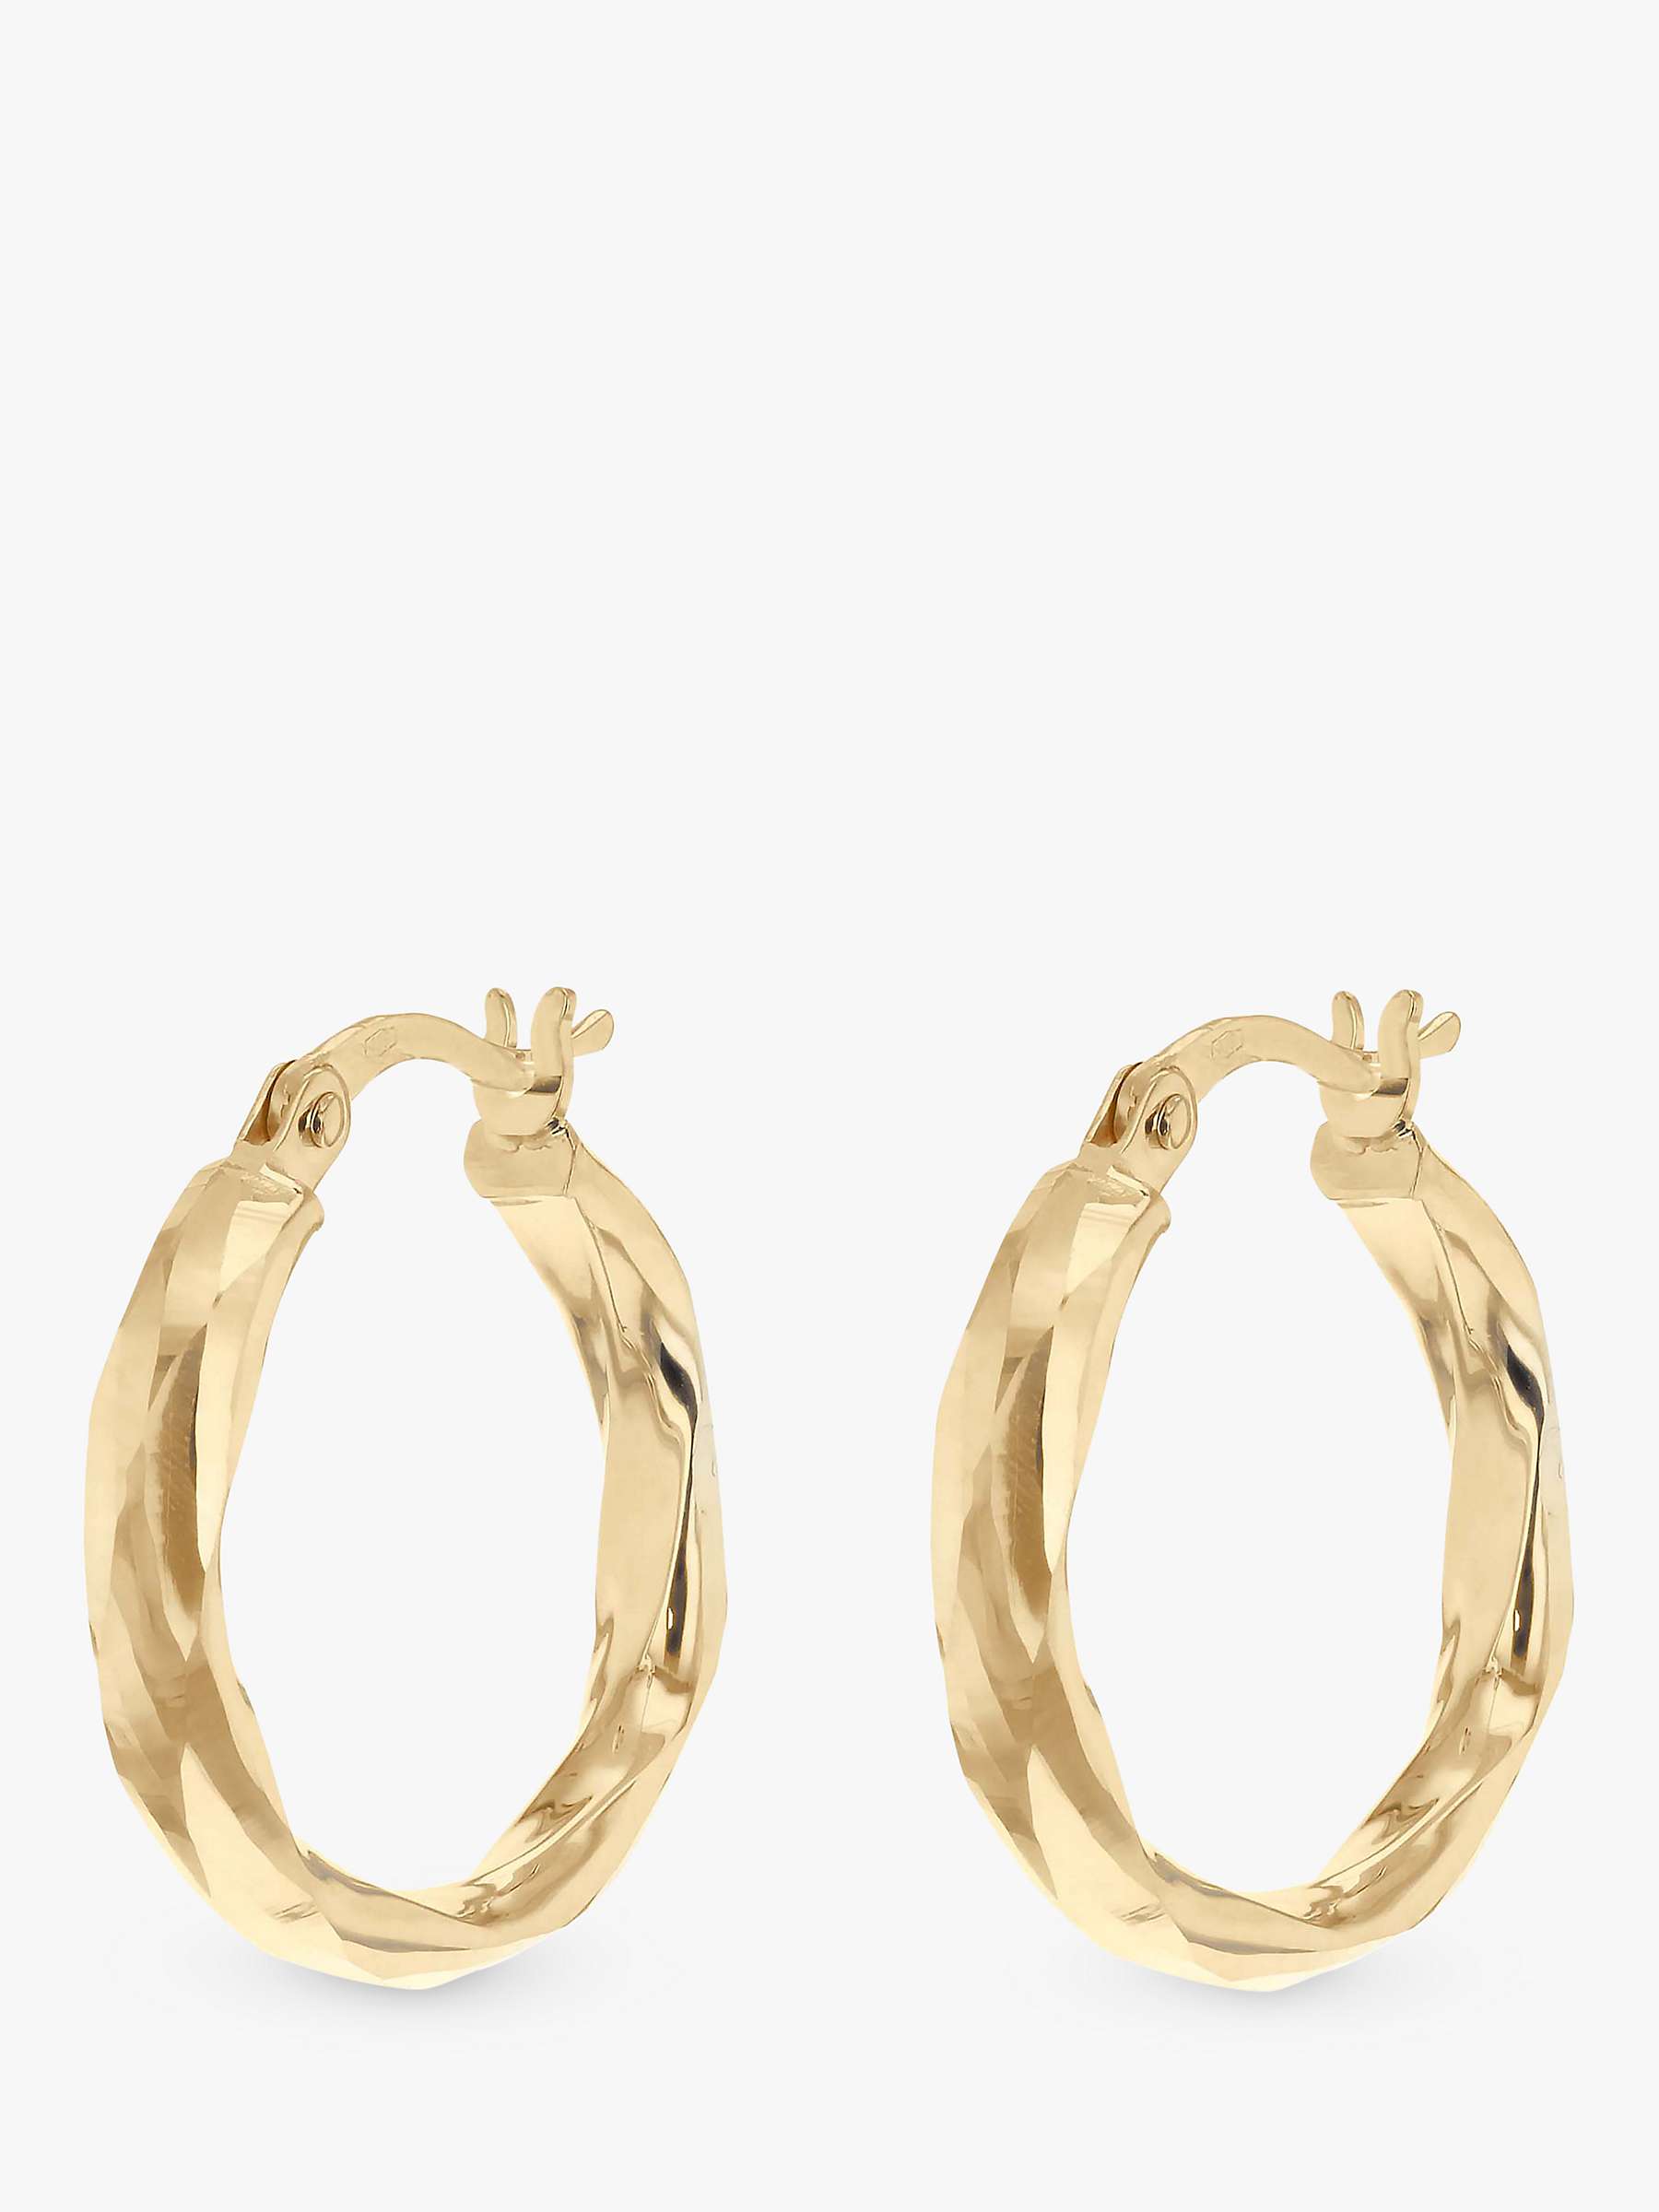 IBB 9ct Gold Faceted Creole Hoop Earrings, Gold at John Lewis & Partners